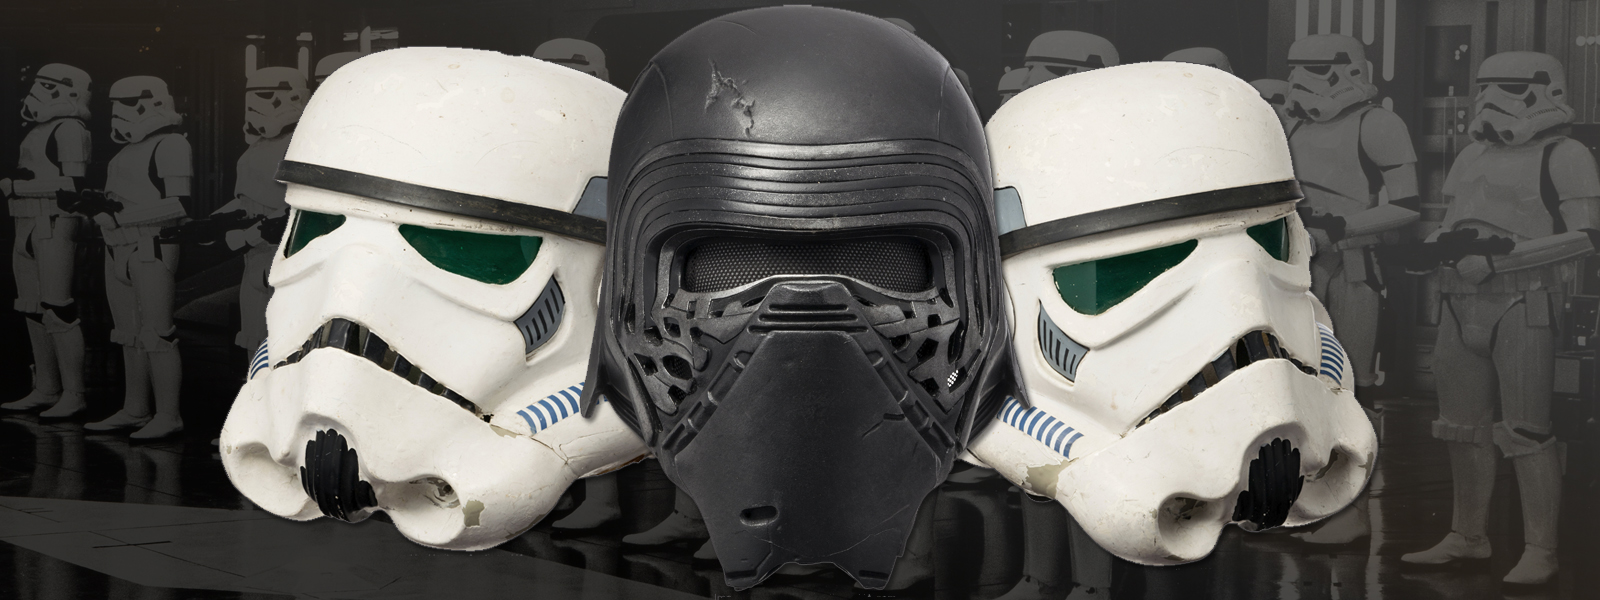 header - This Is the ‘Star Wars’ Auction You’re Looking For